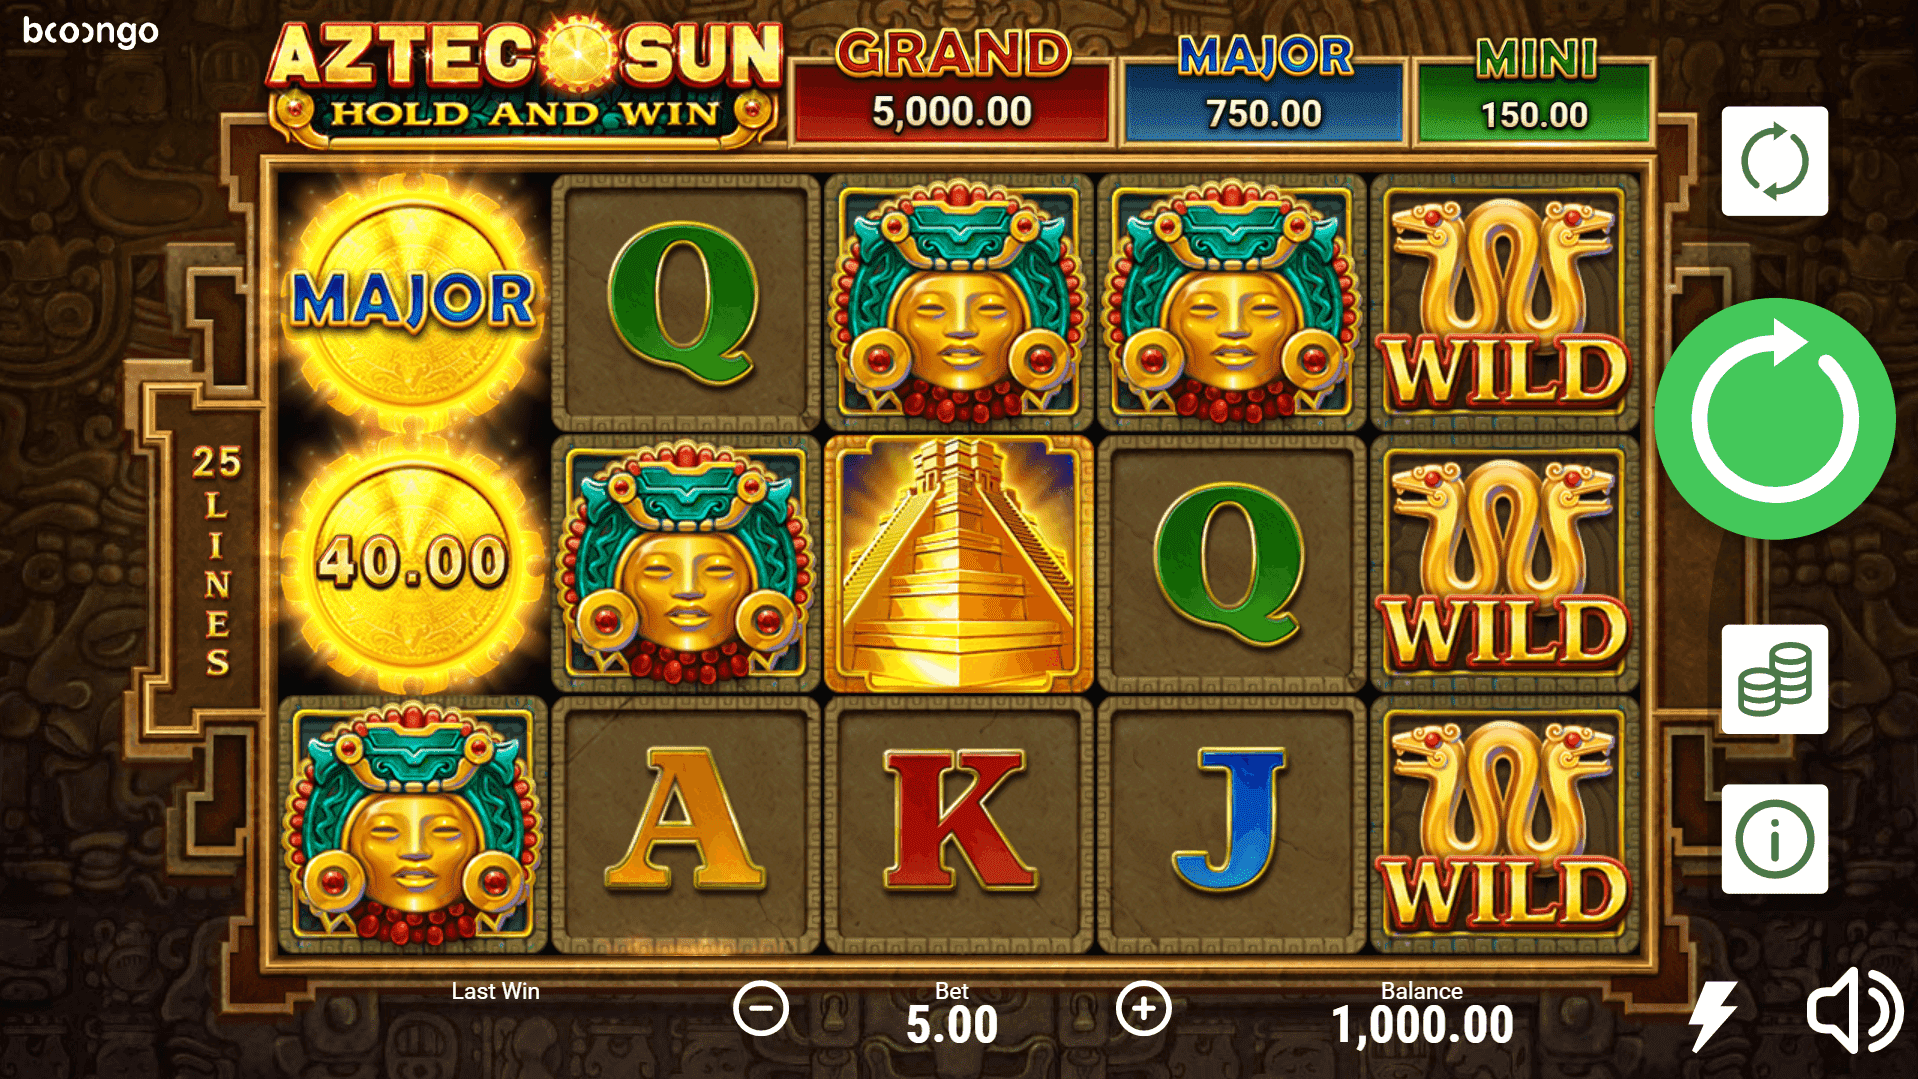 Aztec Sun Hold and Win slot play free